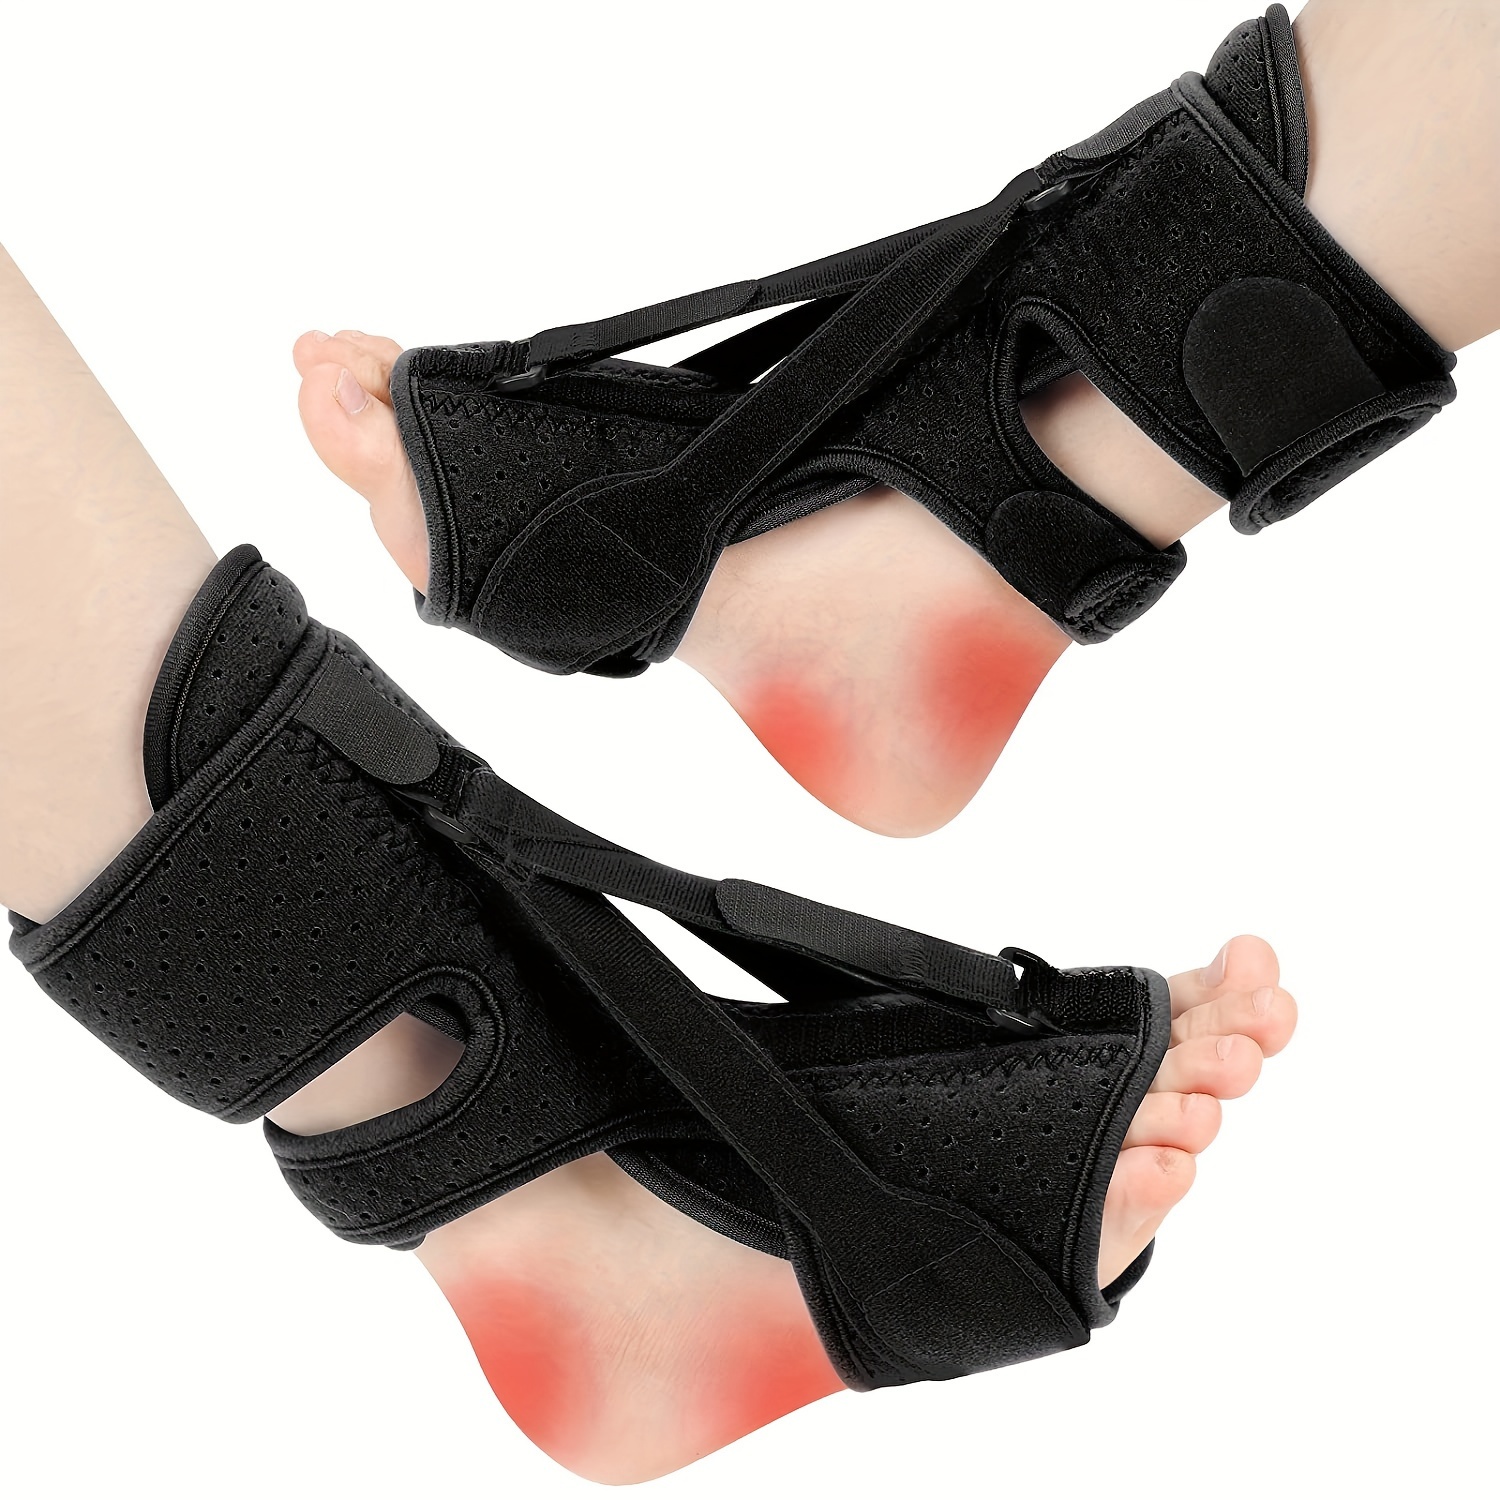 Ankle Brace Foot Drop Orthosis, Adjustable Ankle Joint Support for Women &  Men Varus Valgus Corrector Protection For Drop Foot Orthotic Brace